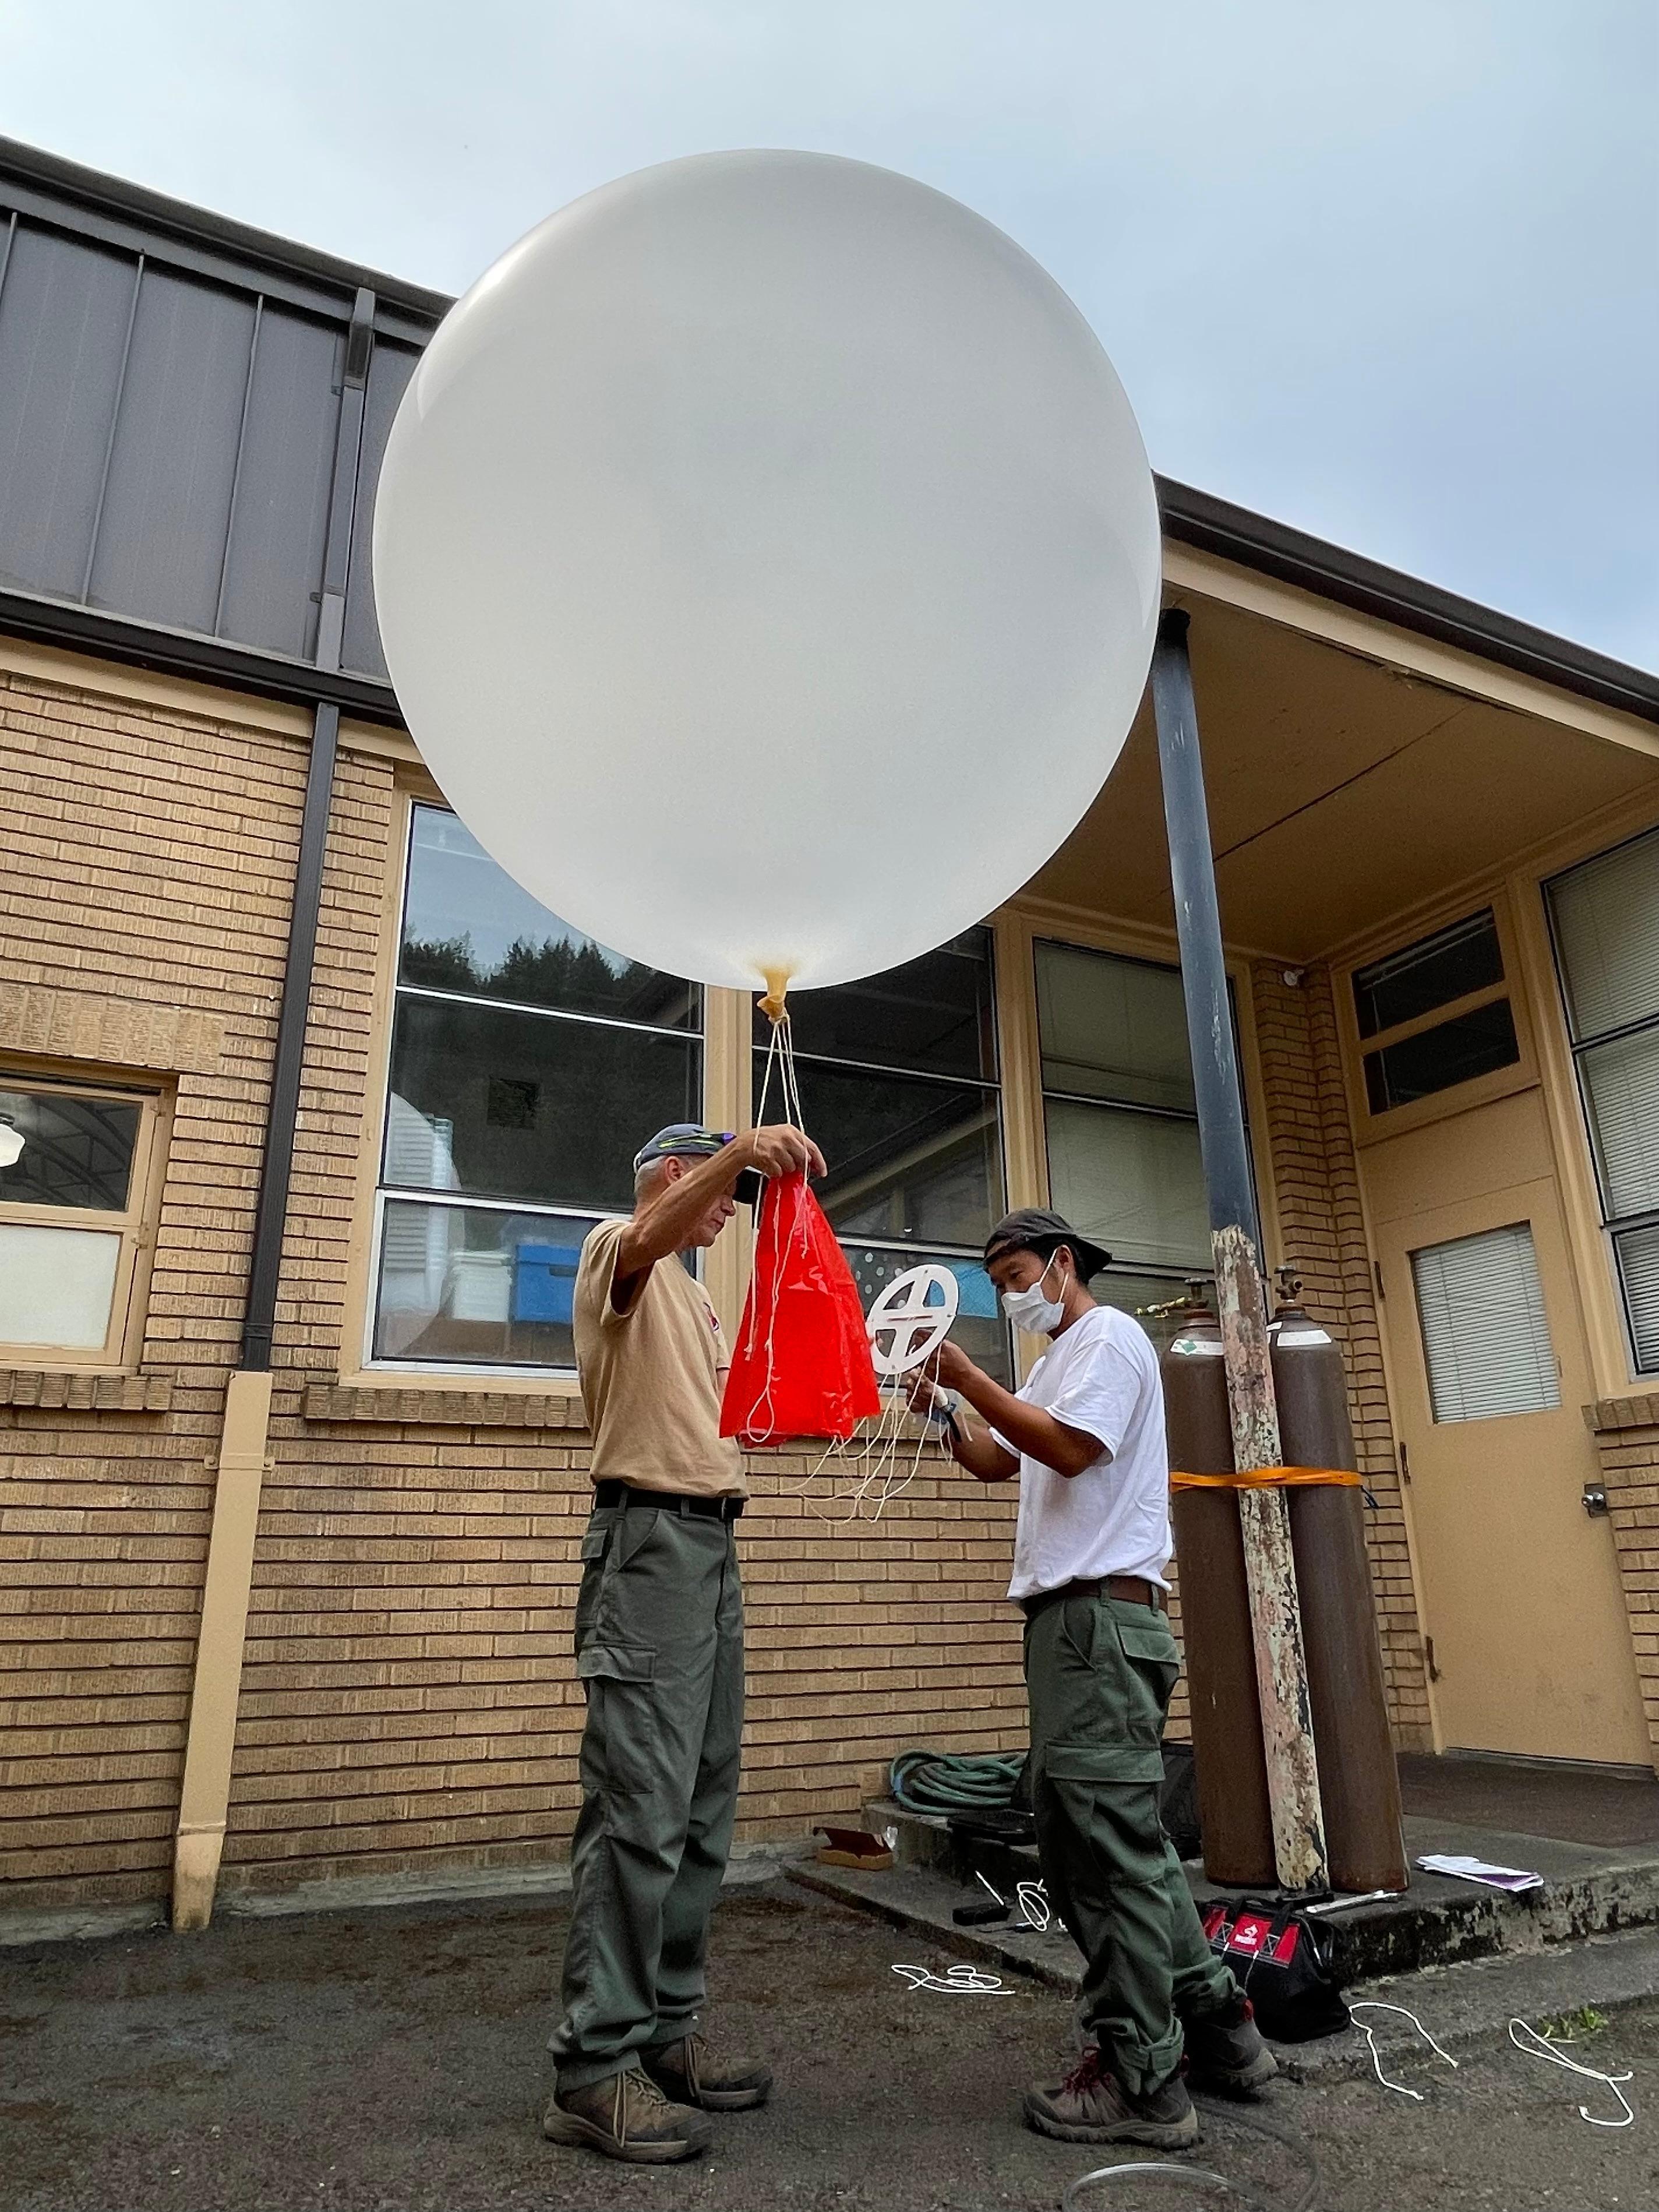 Incident Meteorologists like Genki Kino launch weather balloons on the Cedar Creek Fire to collect site-specific data that may be difficult to get. The instrument is tracked by a radio receiver and transmits data that includes temperature.